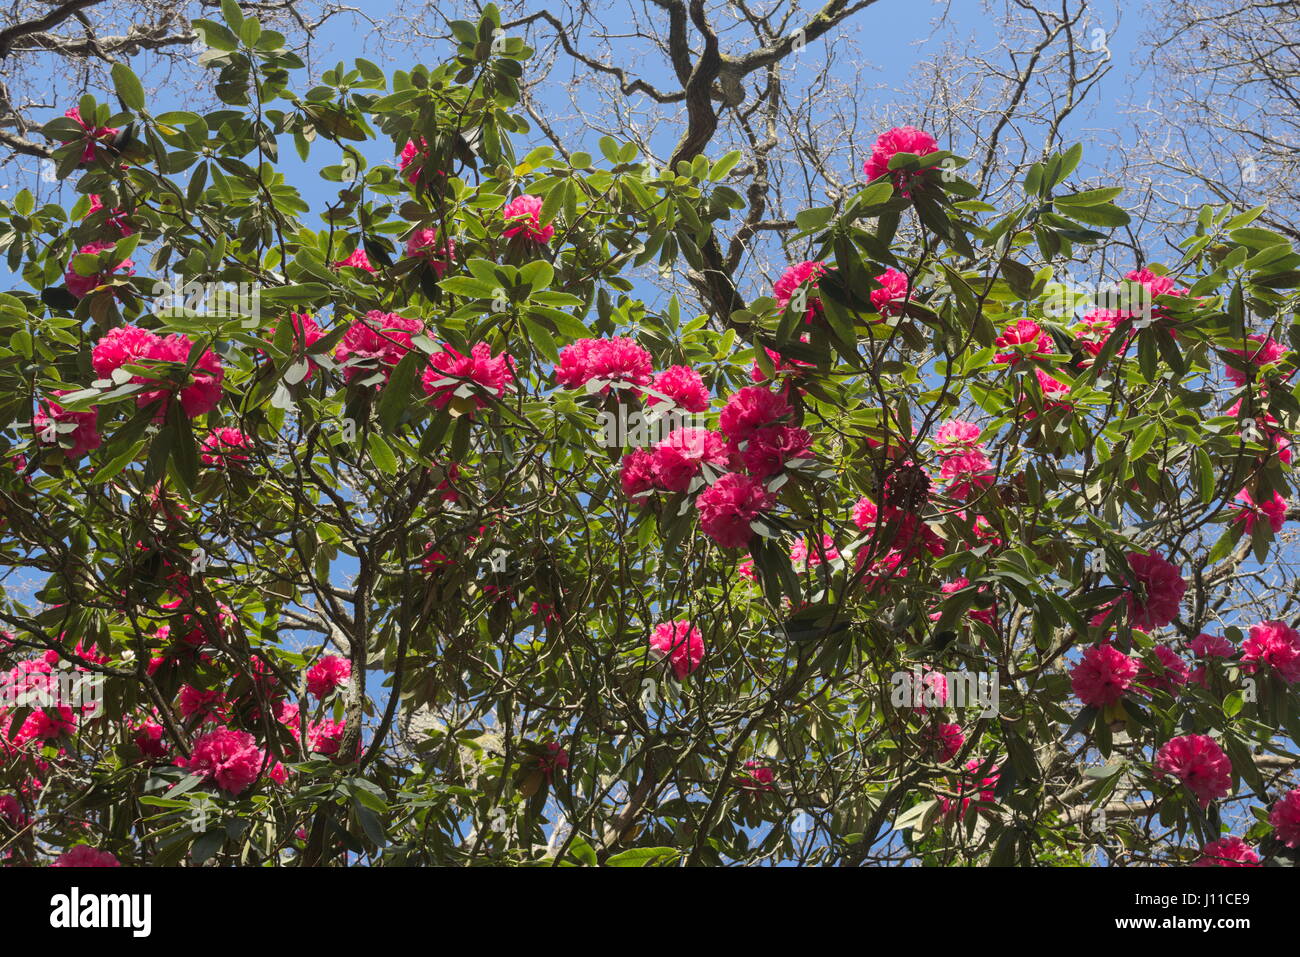 The Magnolia,  Rhododendron and Blossom trees still have no leaves but are full of pink, red and white blooms. Stock Photo